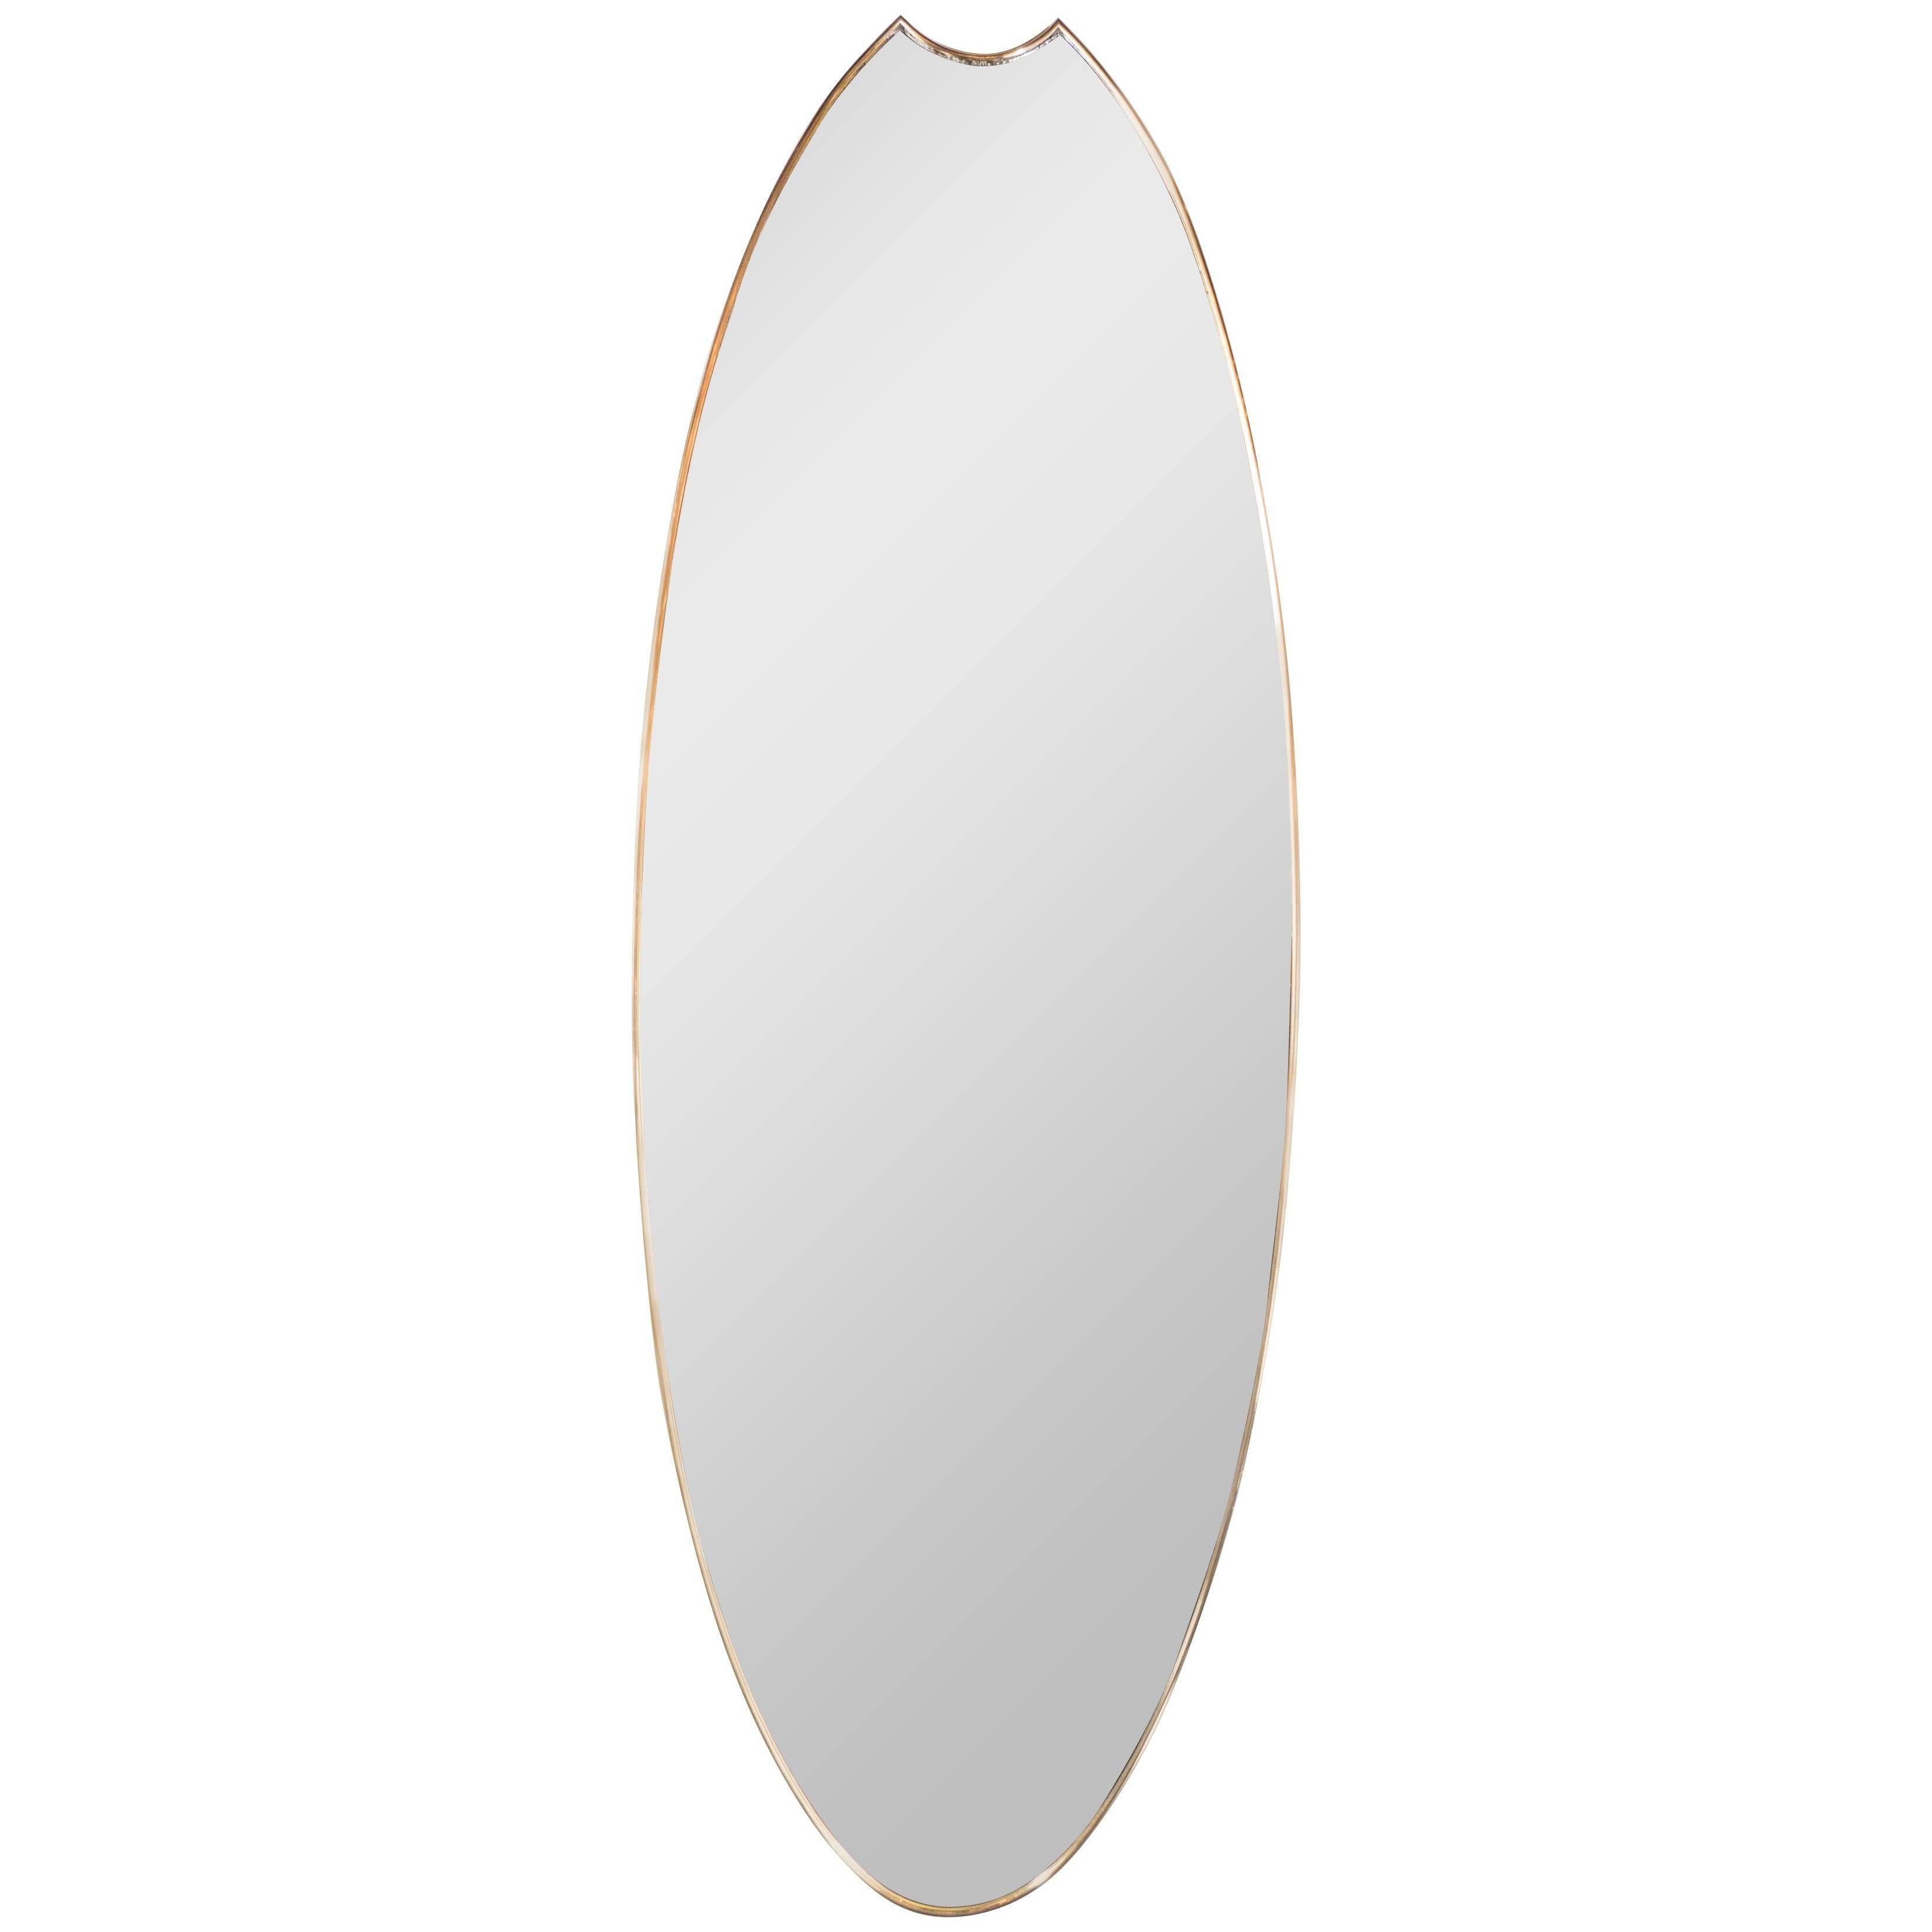 Gorgeous Italian Mid-Century Oval Wall Mirror with Polished Brass Frame